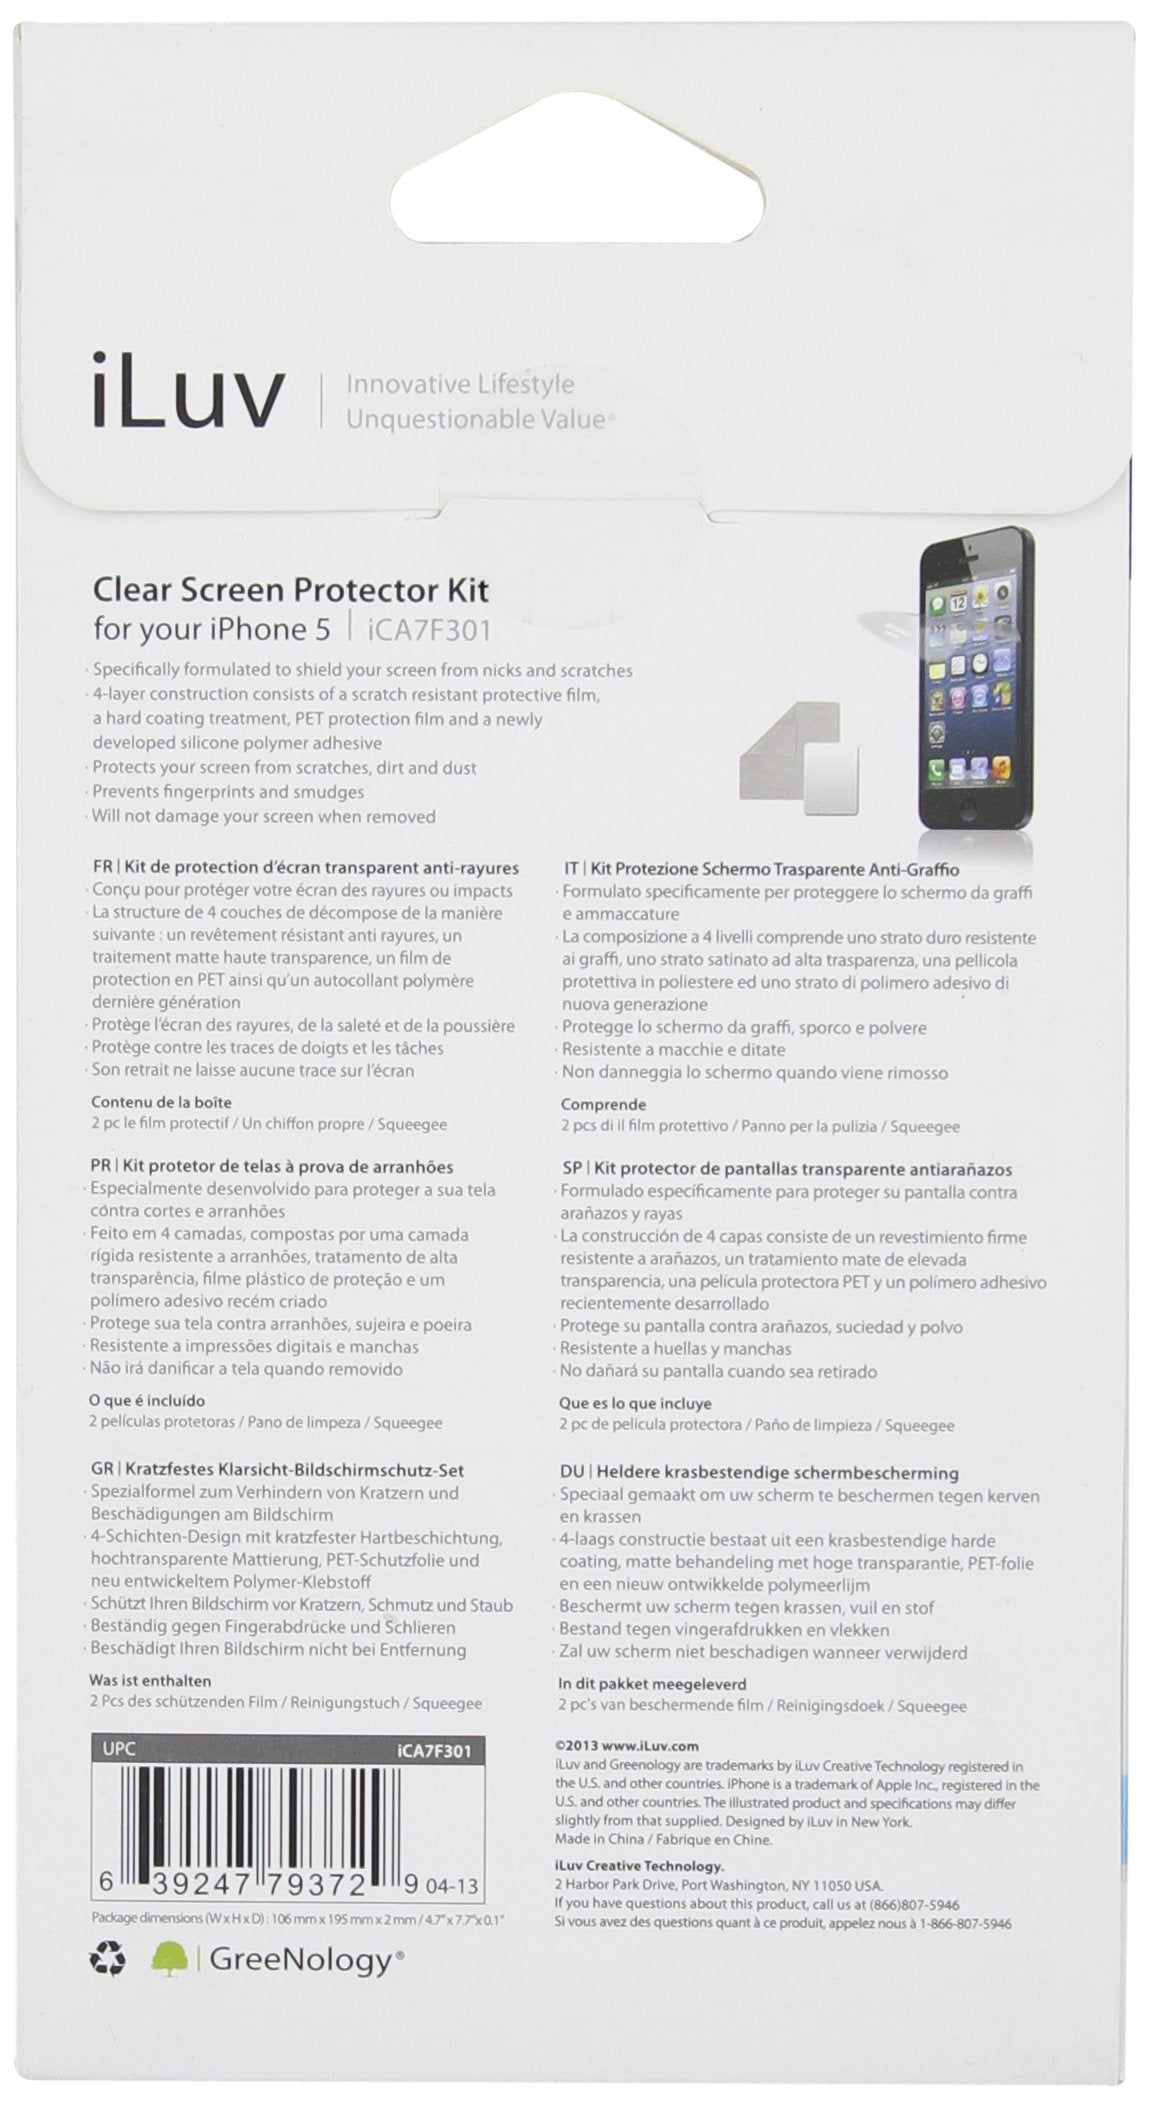 iLuv ICA7F301 Clear Protective Film Kit for iPhone 5 and iPhone 5S - 1 Pack - Screen Protectors - Retail Packaging - Cle